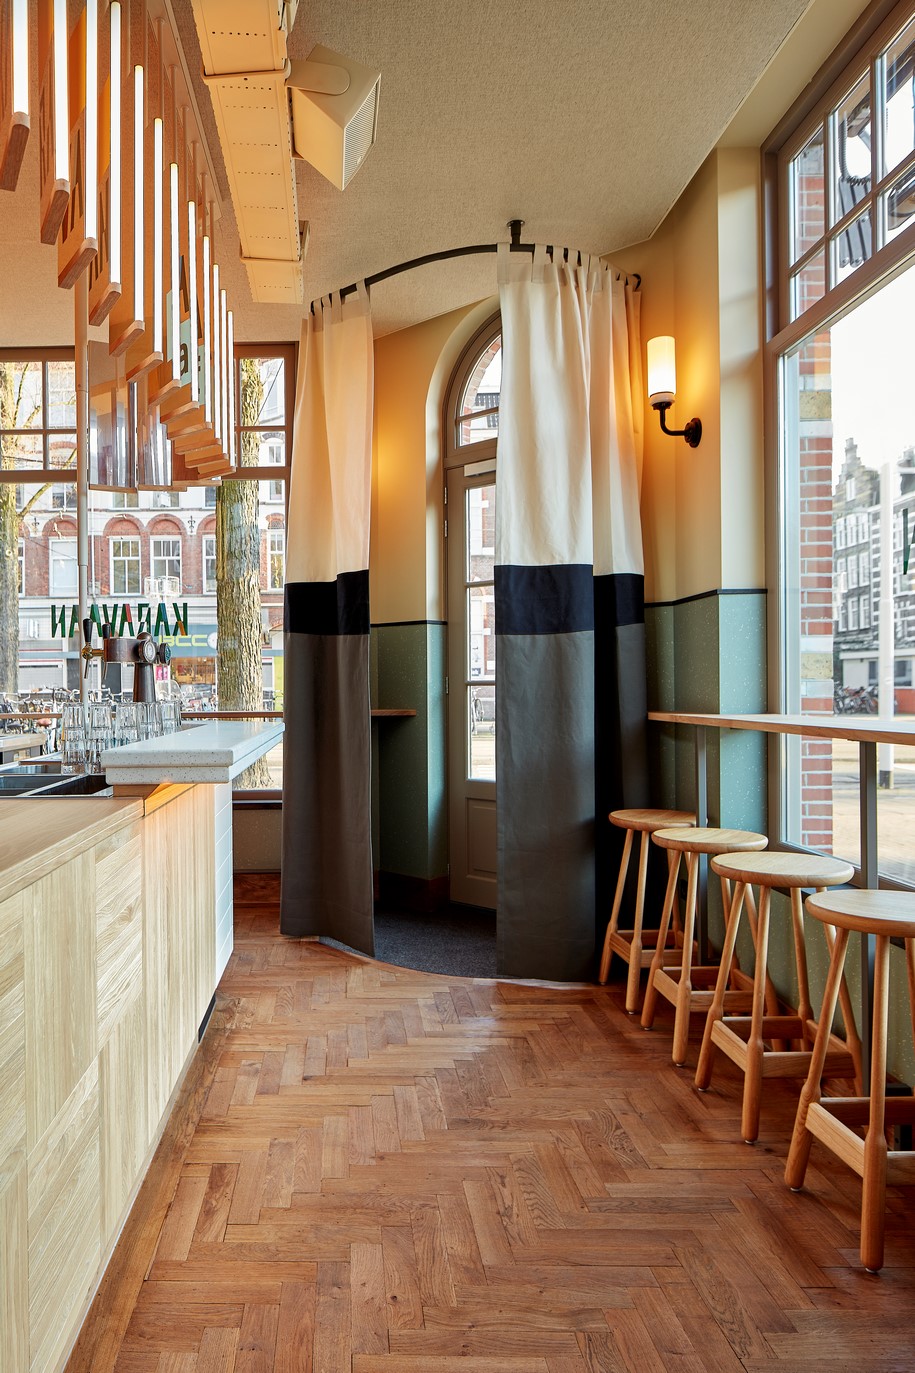 Archisearch Studio Modijefsky has translated the journey of a caravan into a bar and restaurant concept in Amsterdam